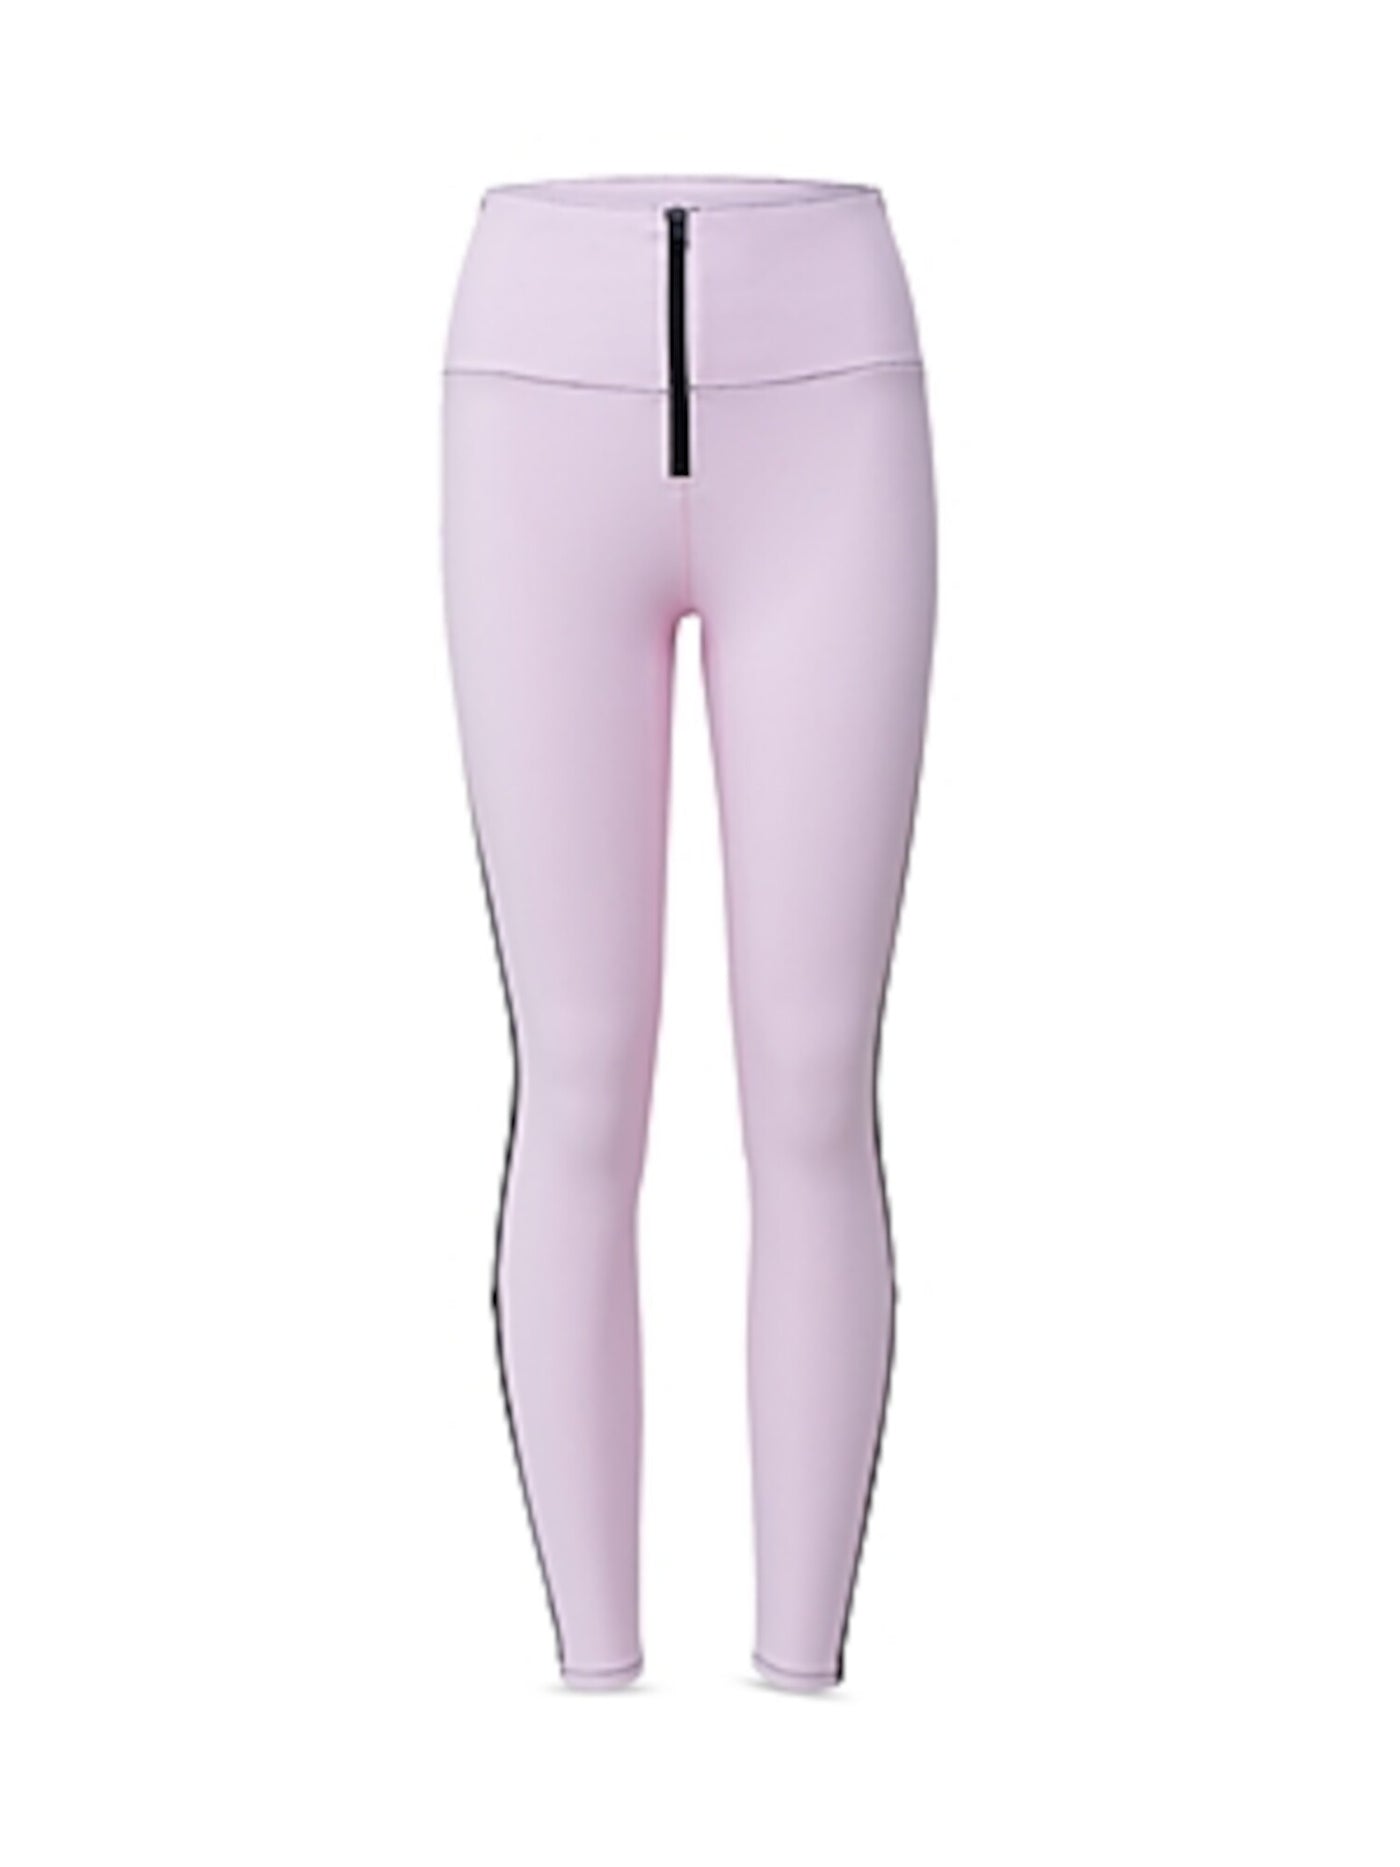 SOLID & STRIPED SPORT Womens Pink Stretch Active Wear Skinny Leggings XS